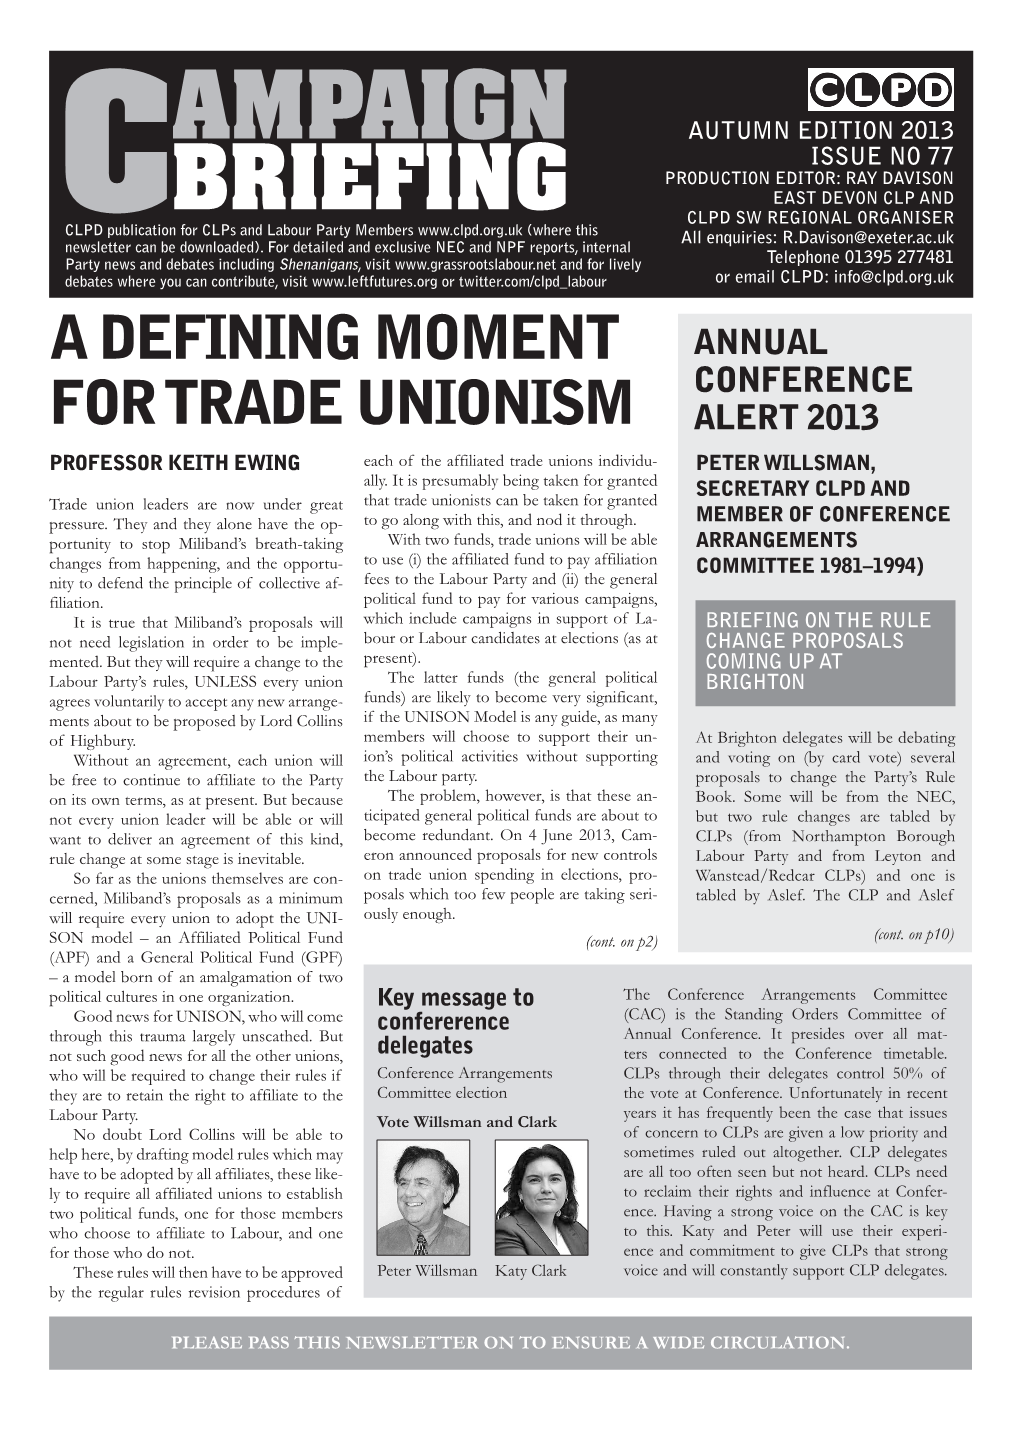 A Defining Moment for Trade Unionism